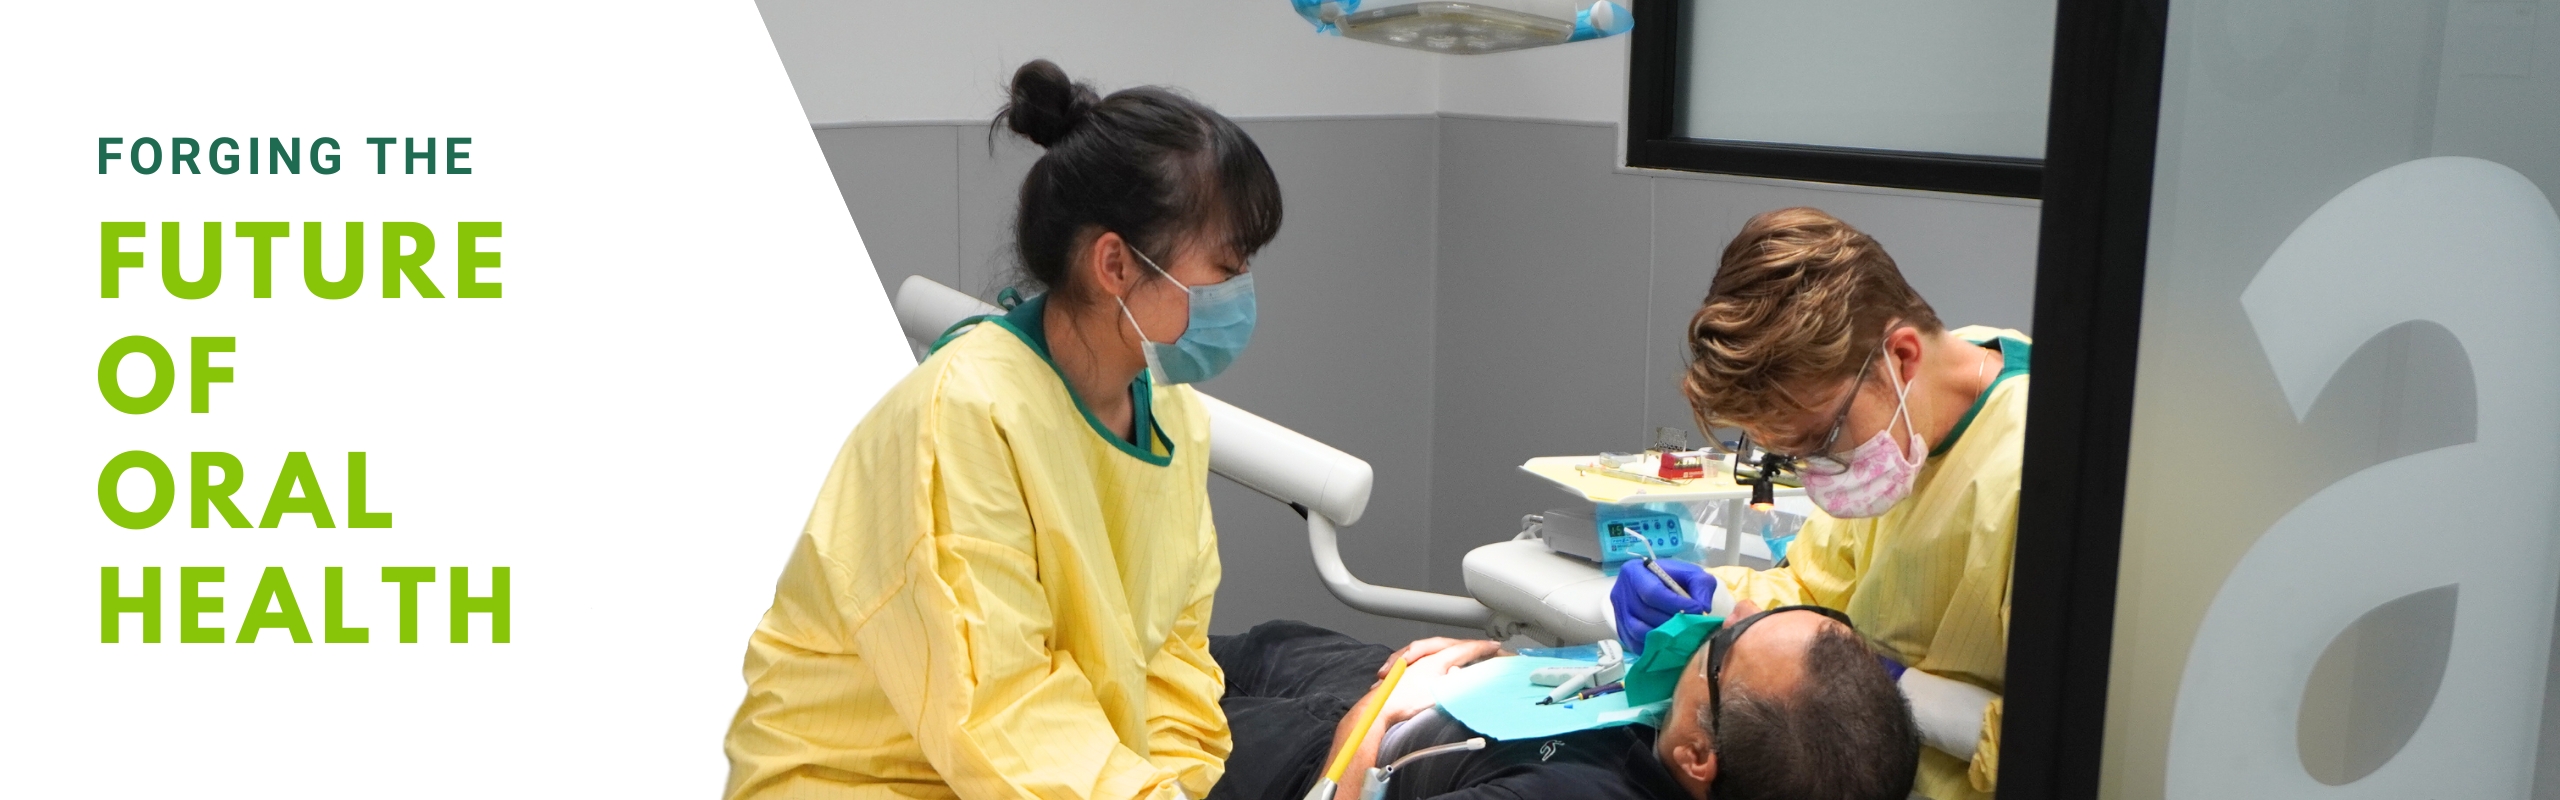 Forging the Future of Oral Health